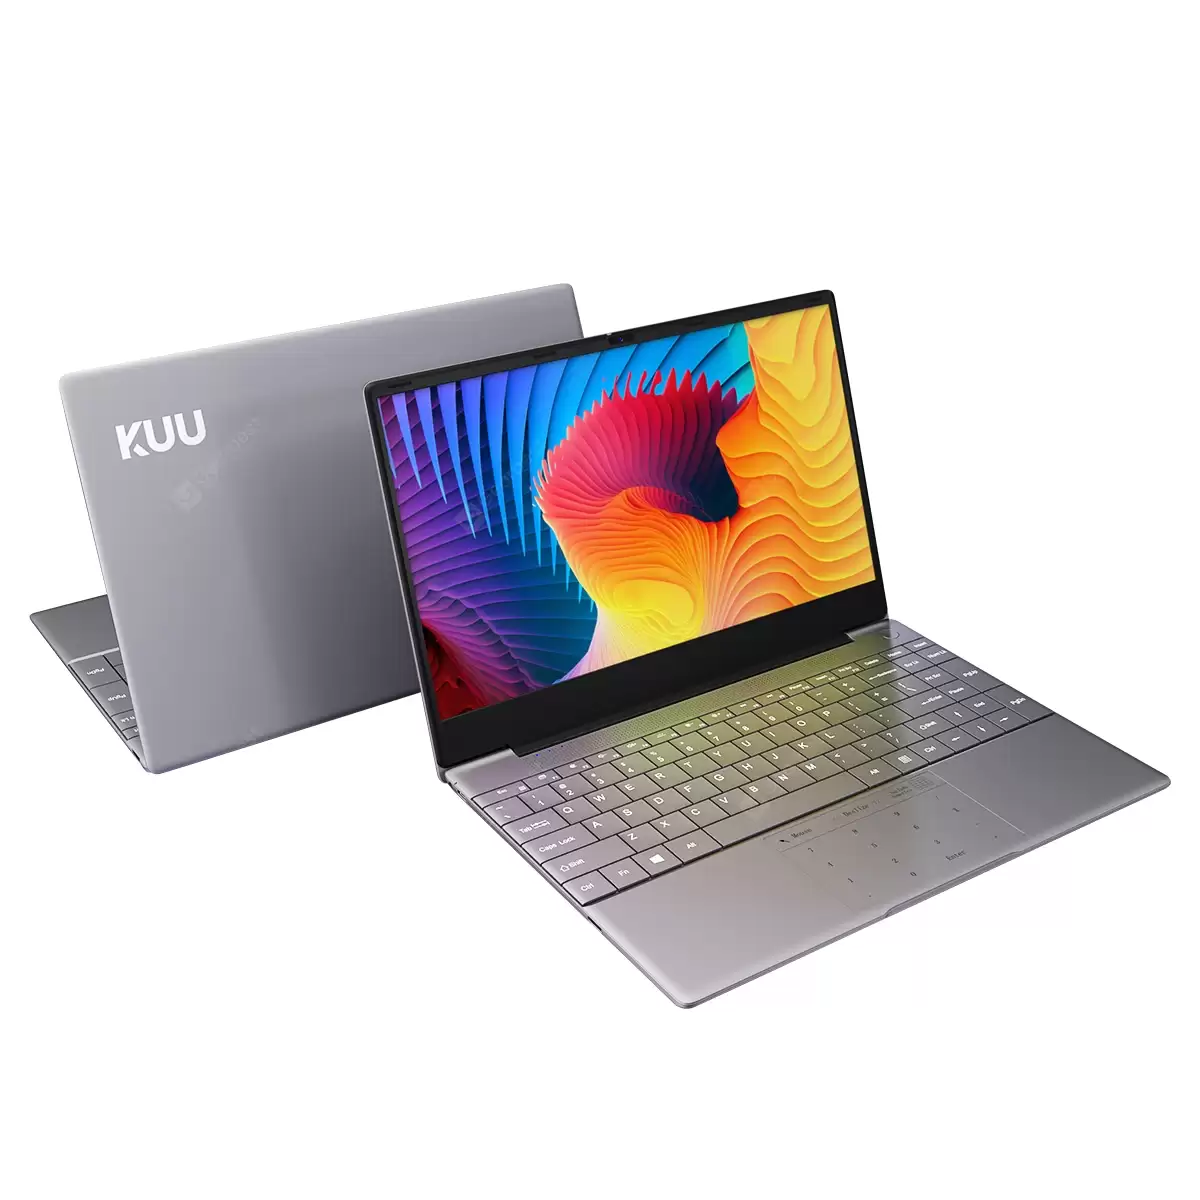 Order In Just $439.98 Kuu K2s Intel Celeron J4115 Processor 14.1-Inch Ips Screen All Metal Shell Office Notebook 8gb Ram Windows 10 256gb/512gb Ssd - 256gb China - 104998717327252512 With This Gearbest Coupon